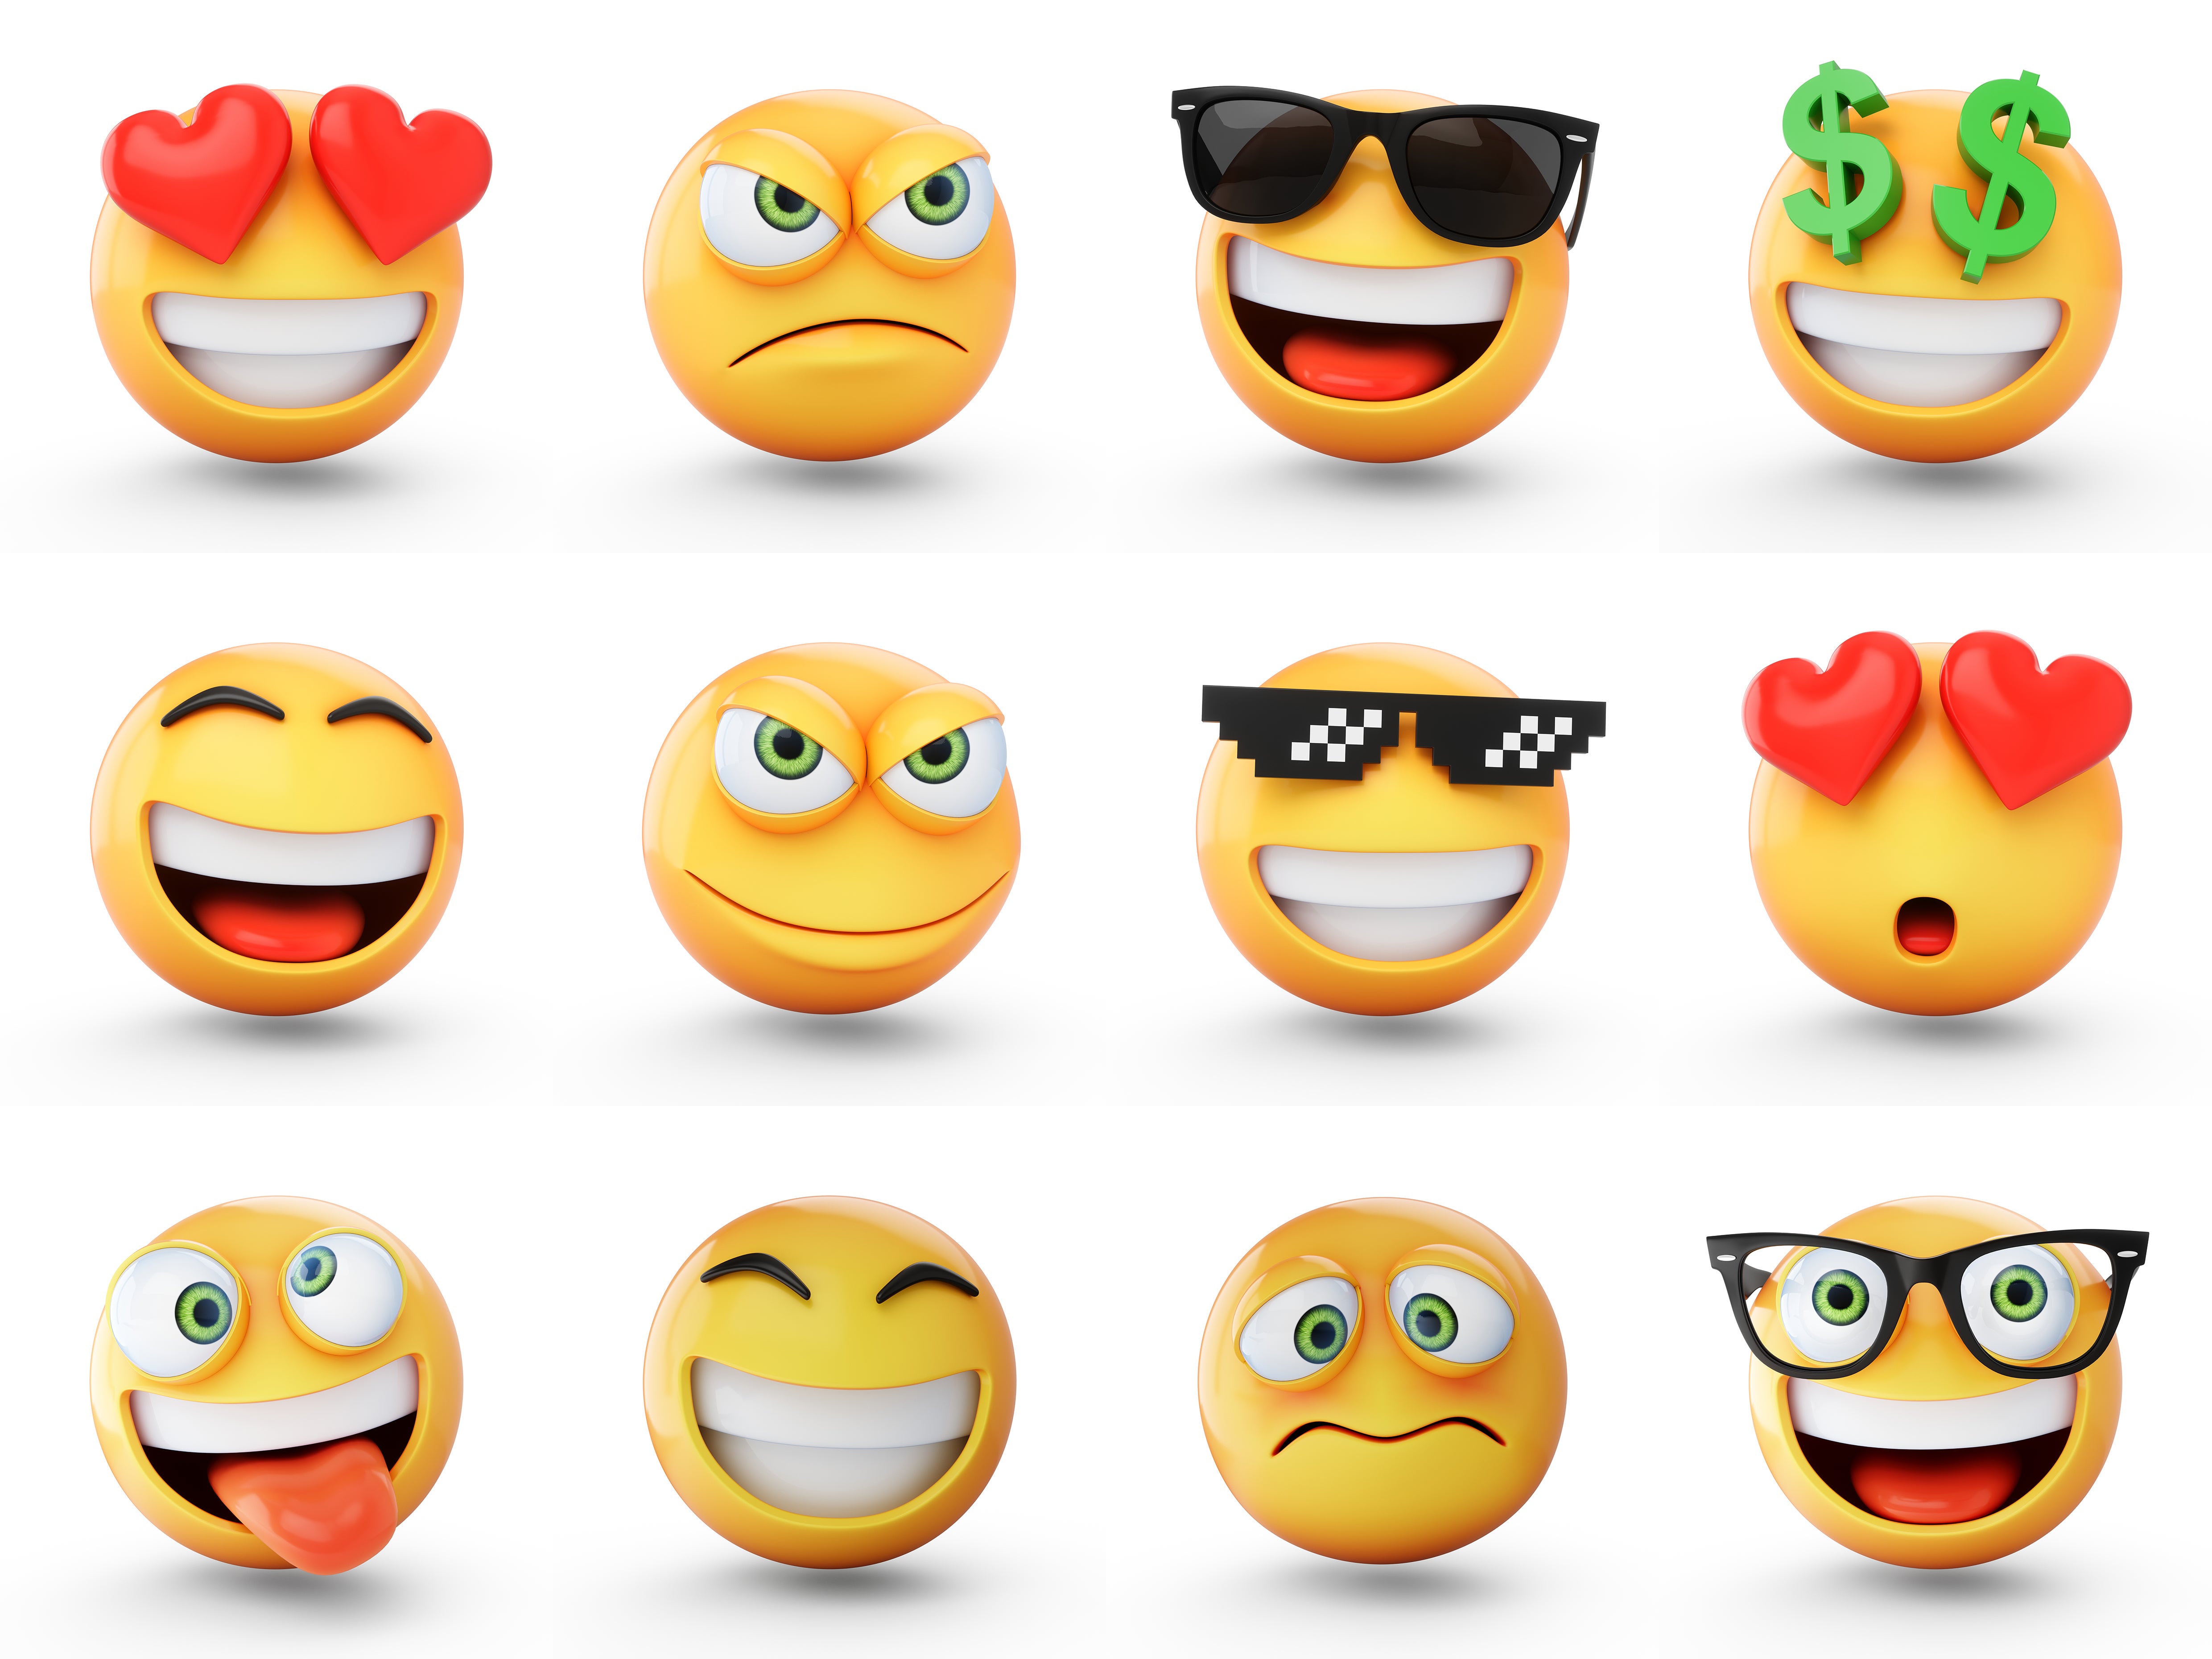 An array of emojis, some with eyes popping out, others with symbols, like dollar signs, in looks not normally seen.